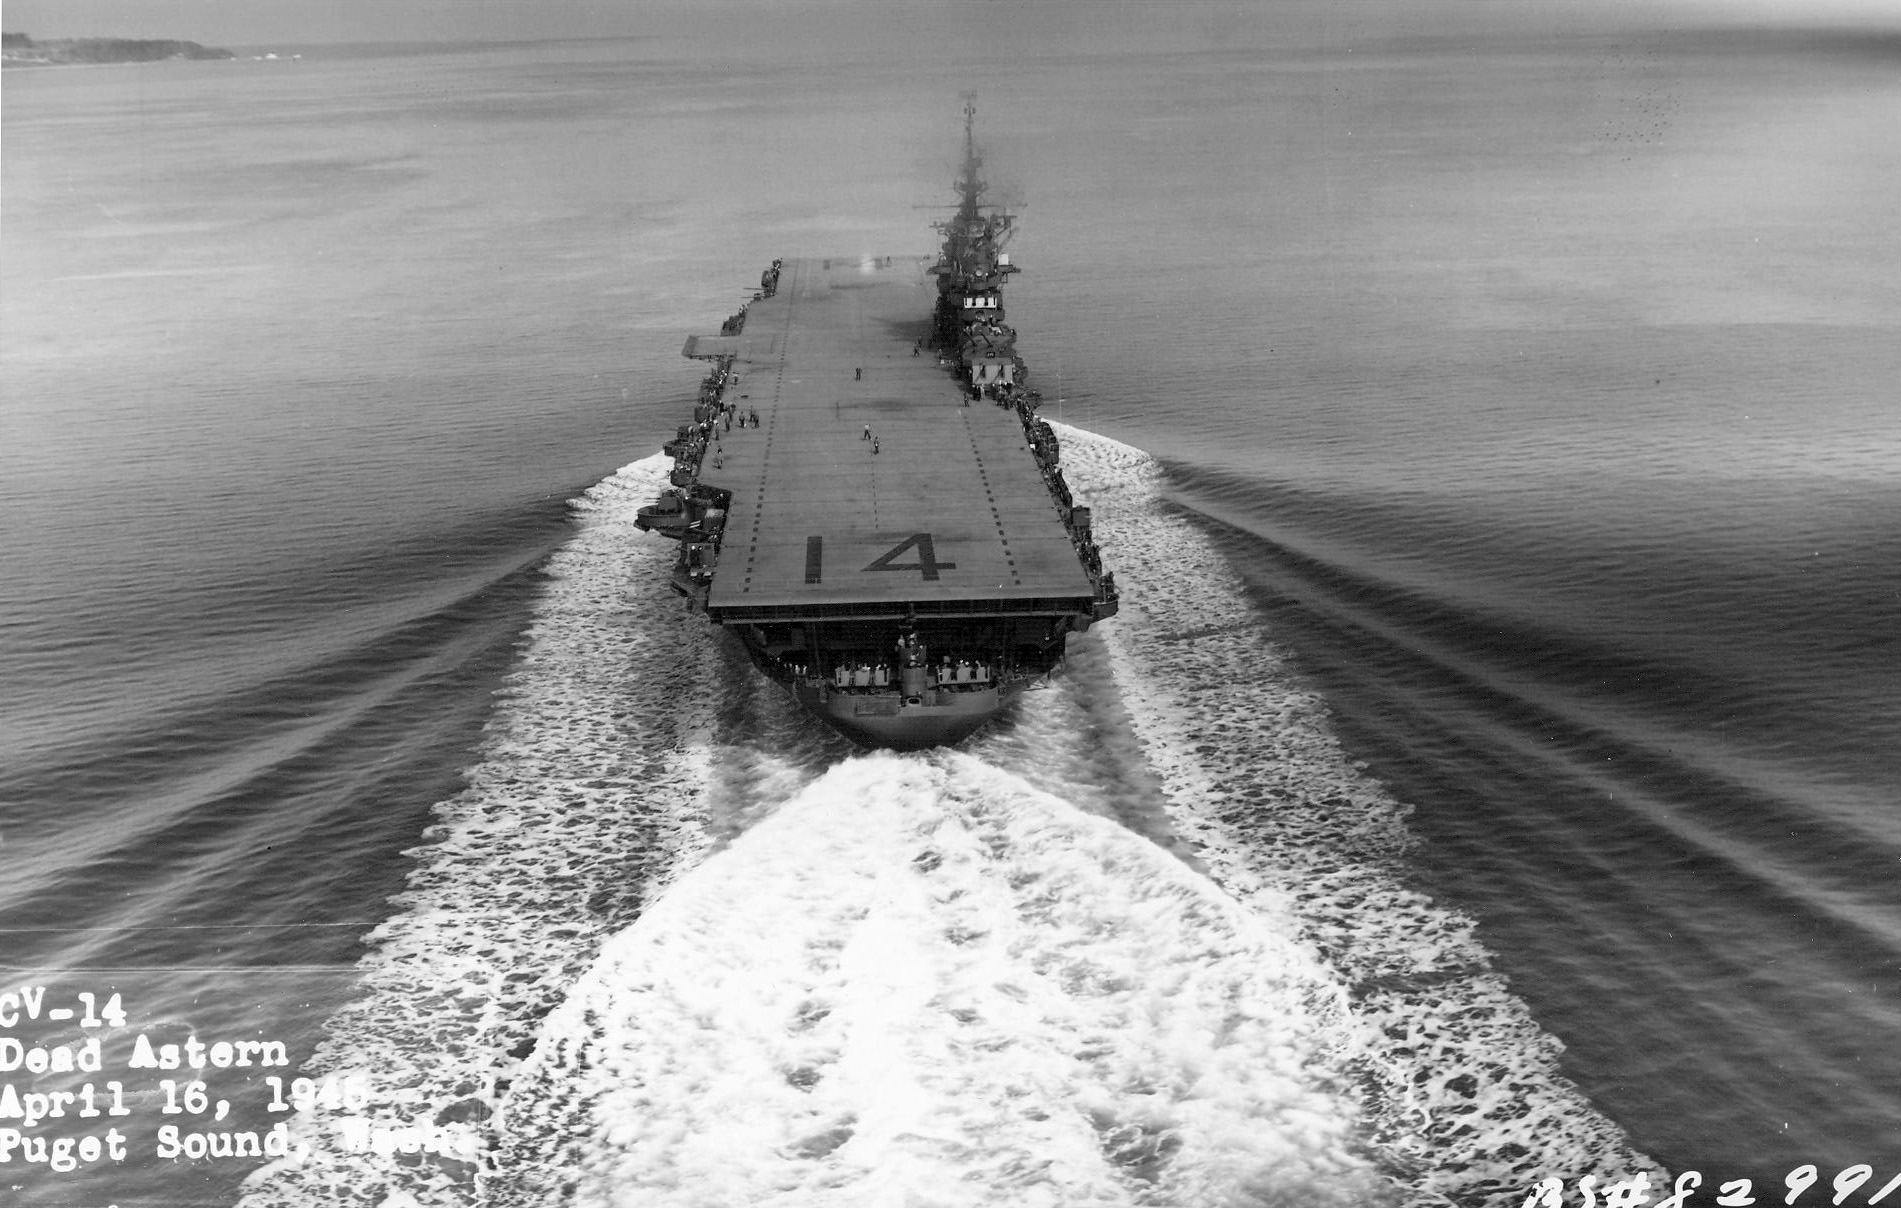 USS Ticonderoga steams down Puget Sound, Washington, United States on her trials after substantial repairs from battle damage, Apr 16, 1945. Photo 2 of 4.